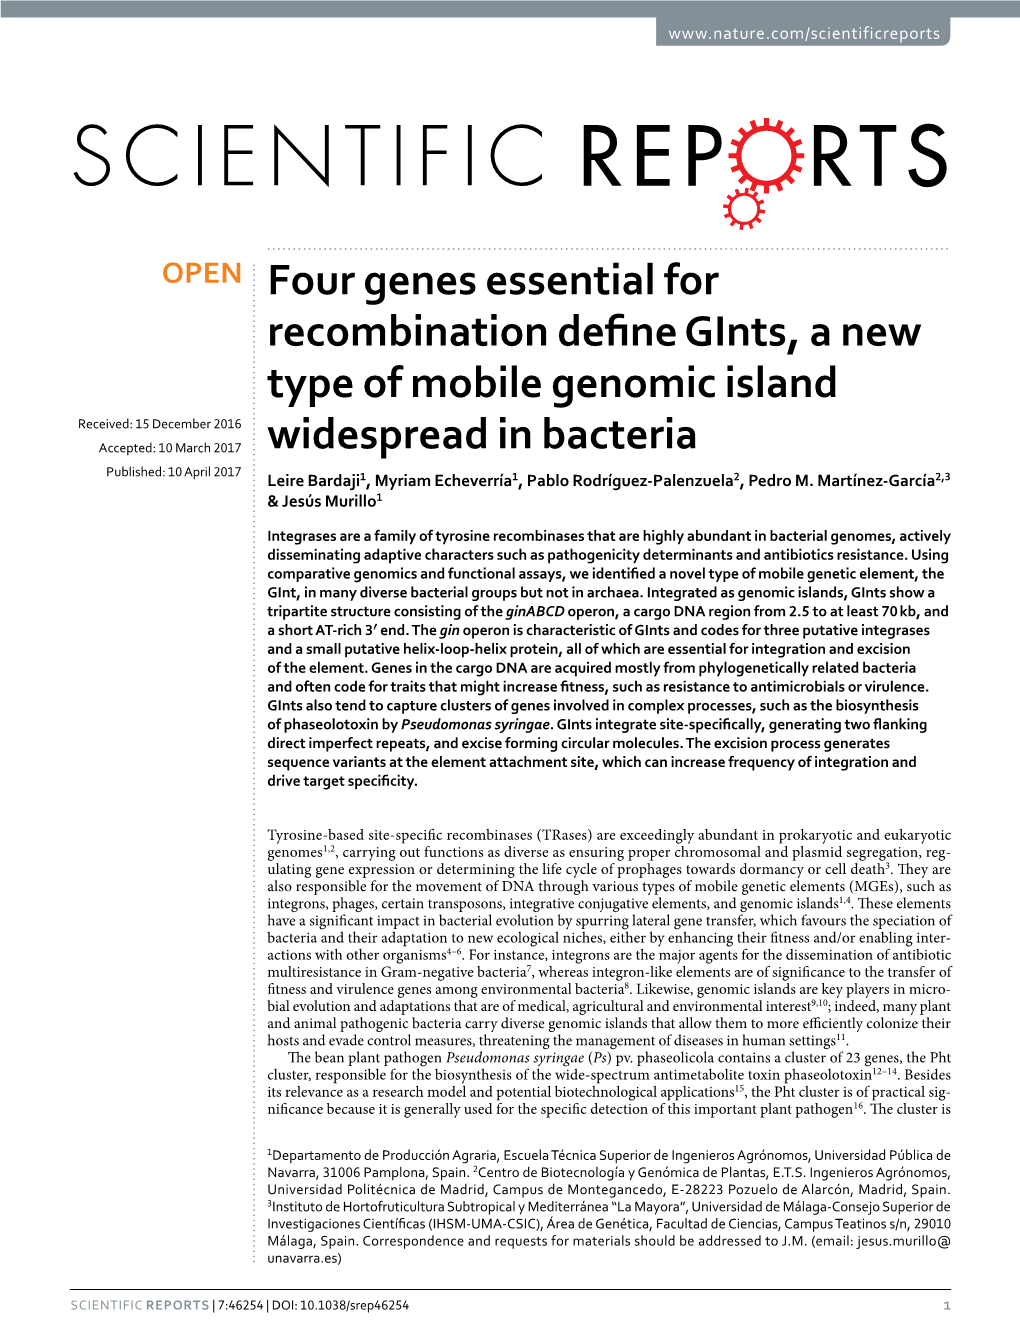 Four Genes Essential for Recombination Define Gints, a New